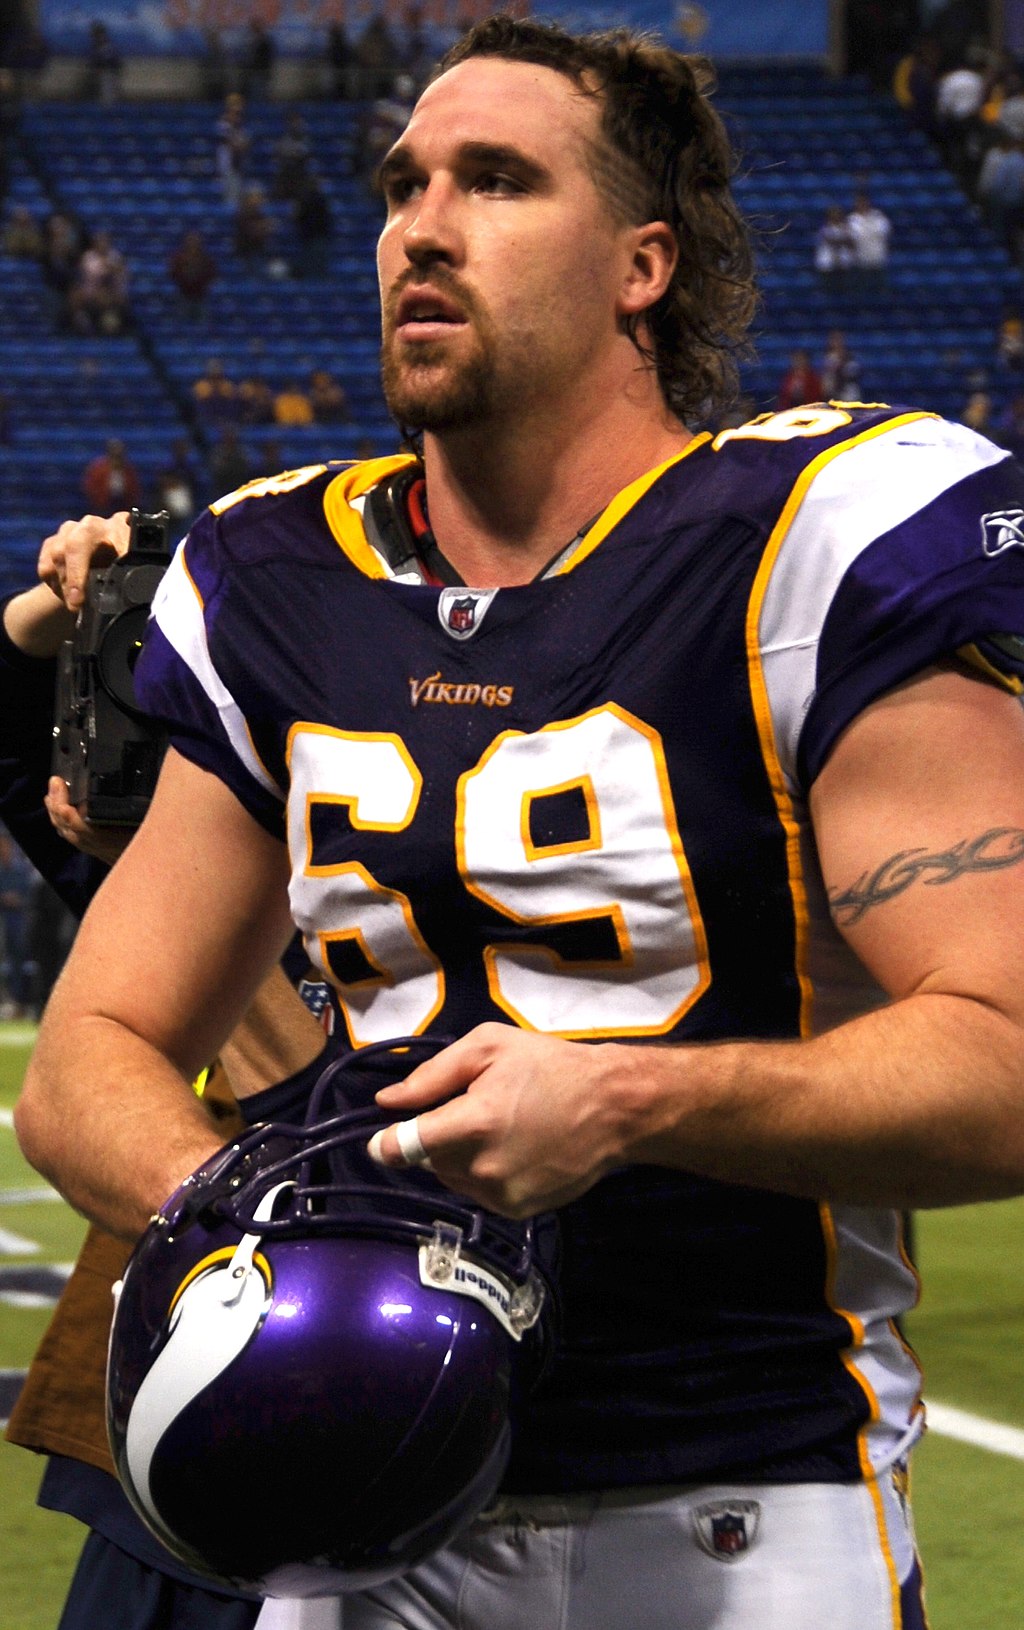 Football Star Jared Allen on Our Duty to Honor Veterans - American